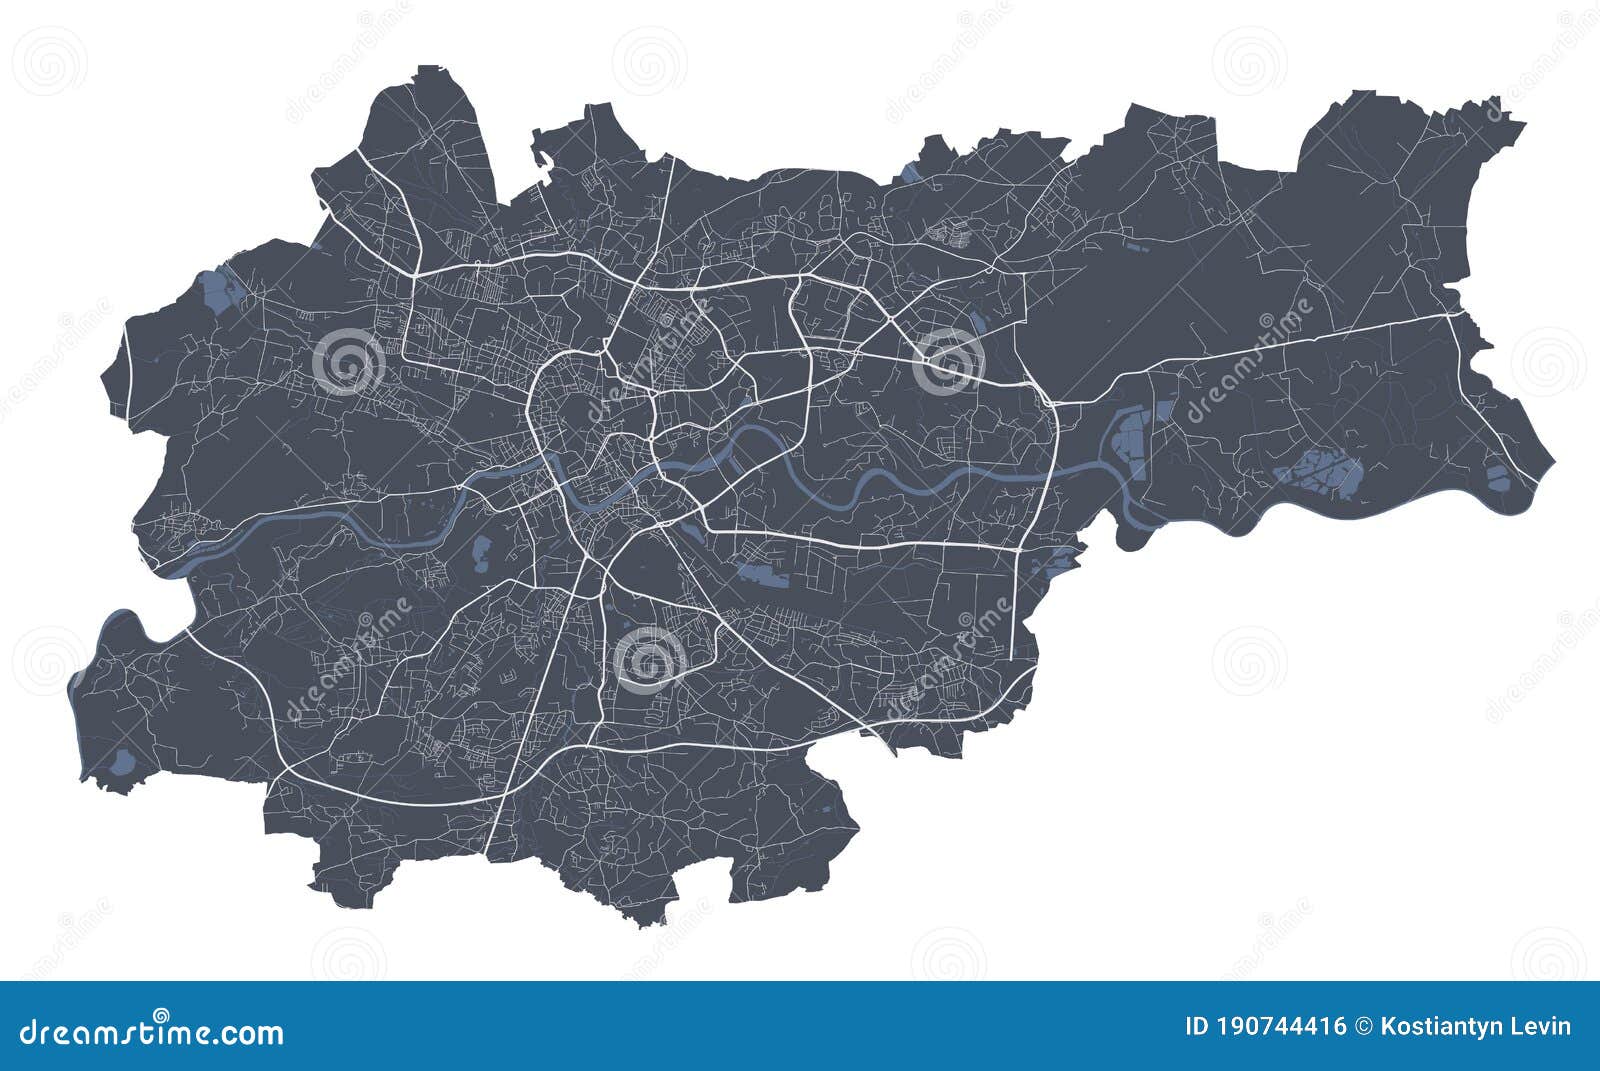 krakow map. detailed map of krakow city poster with streets. dark 